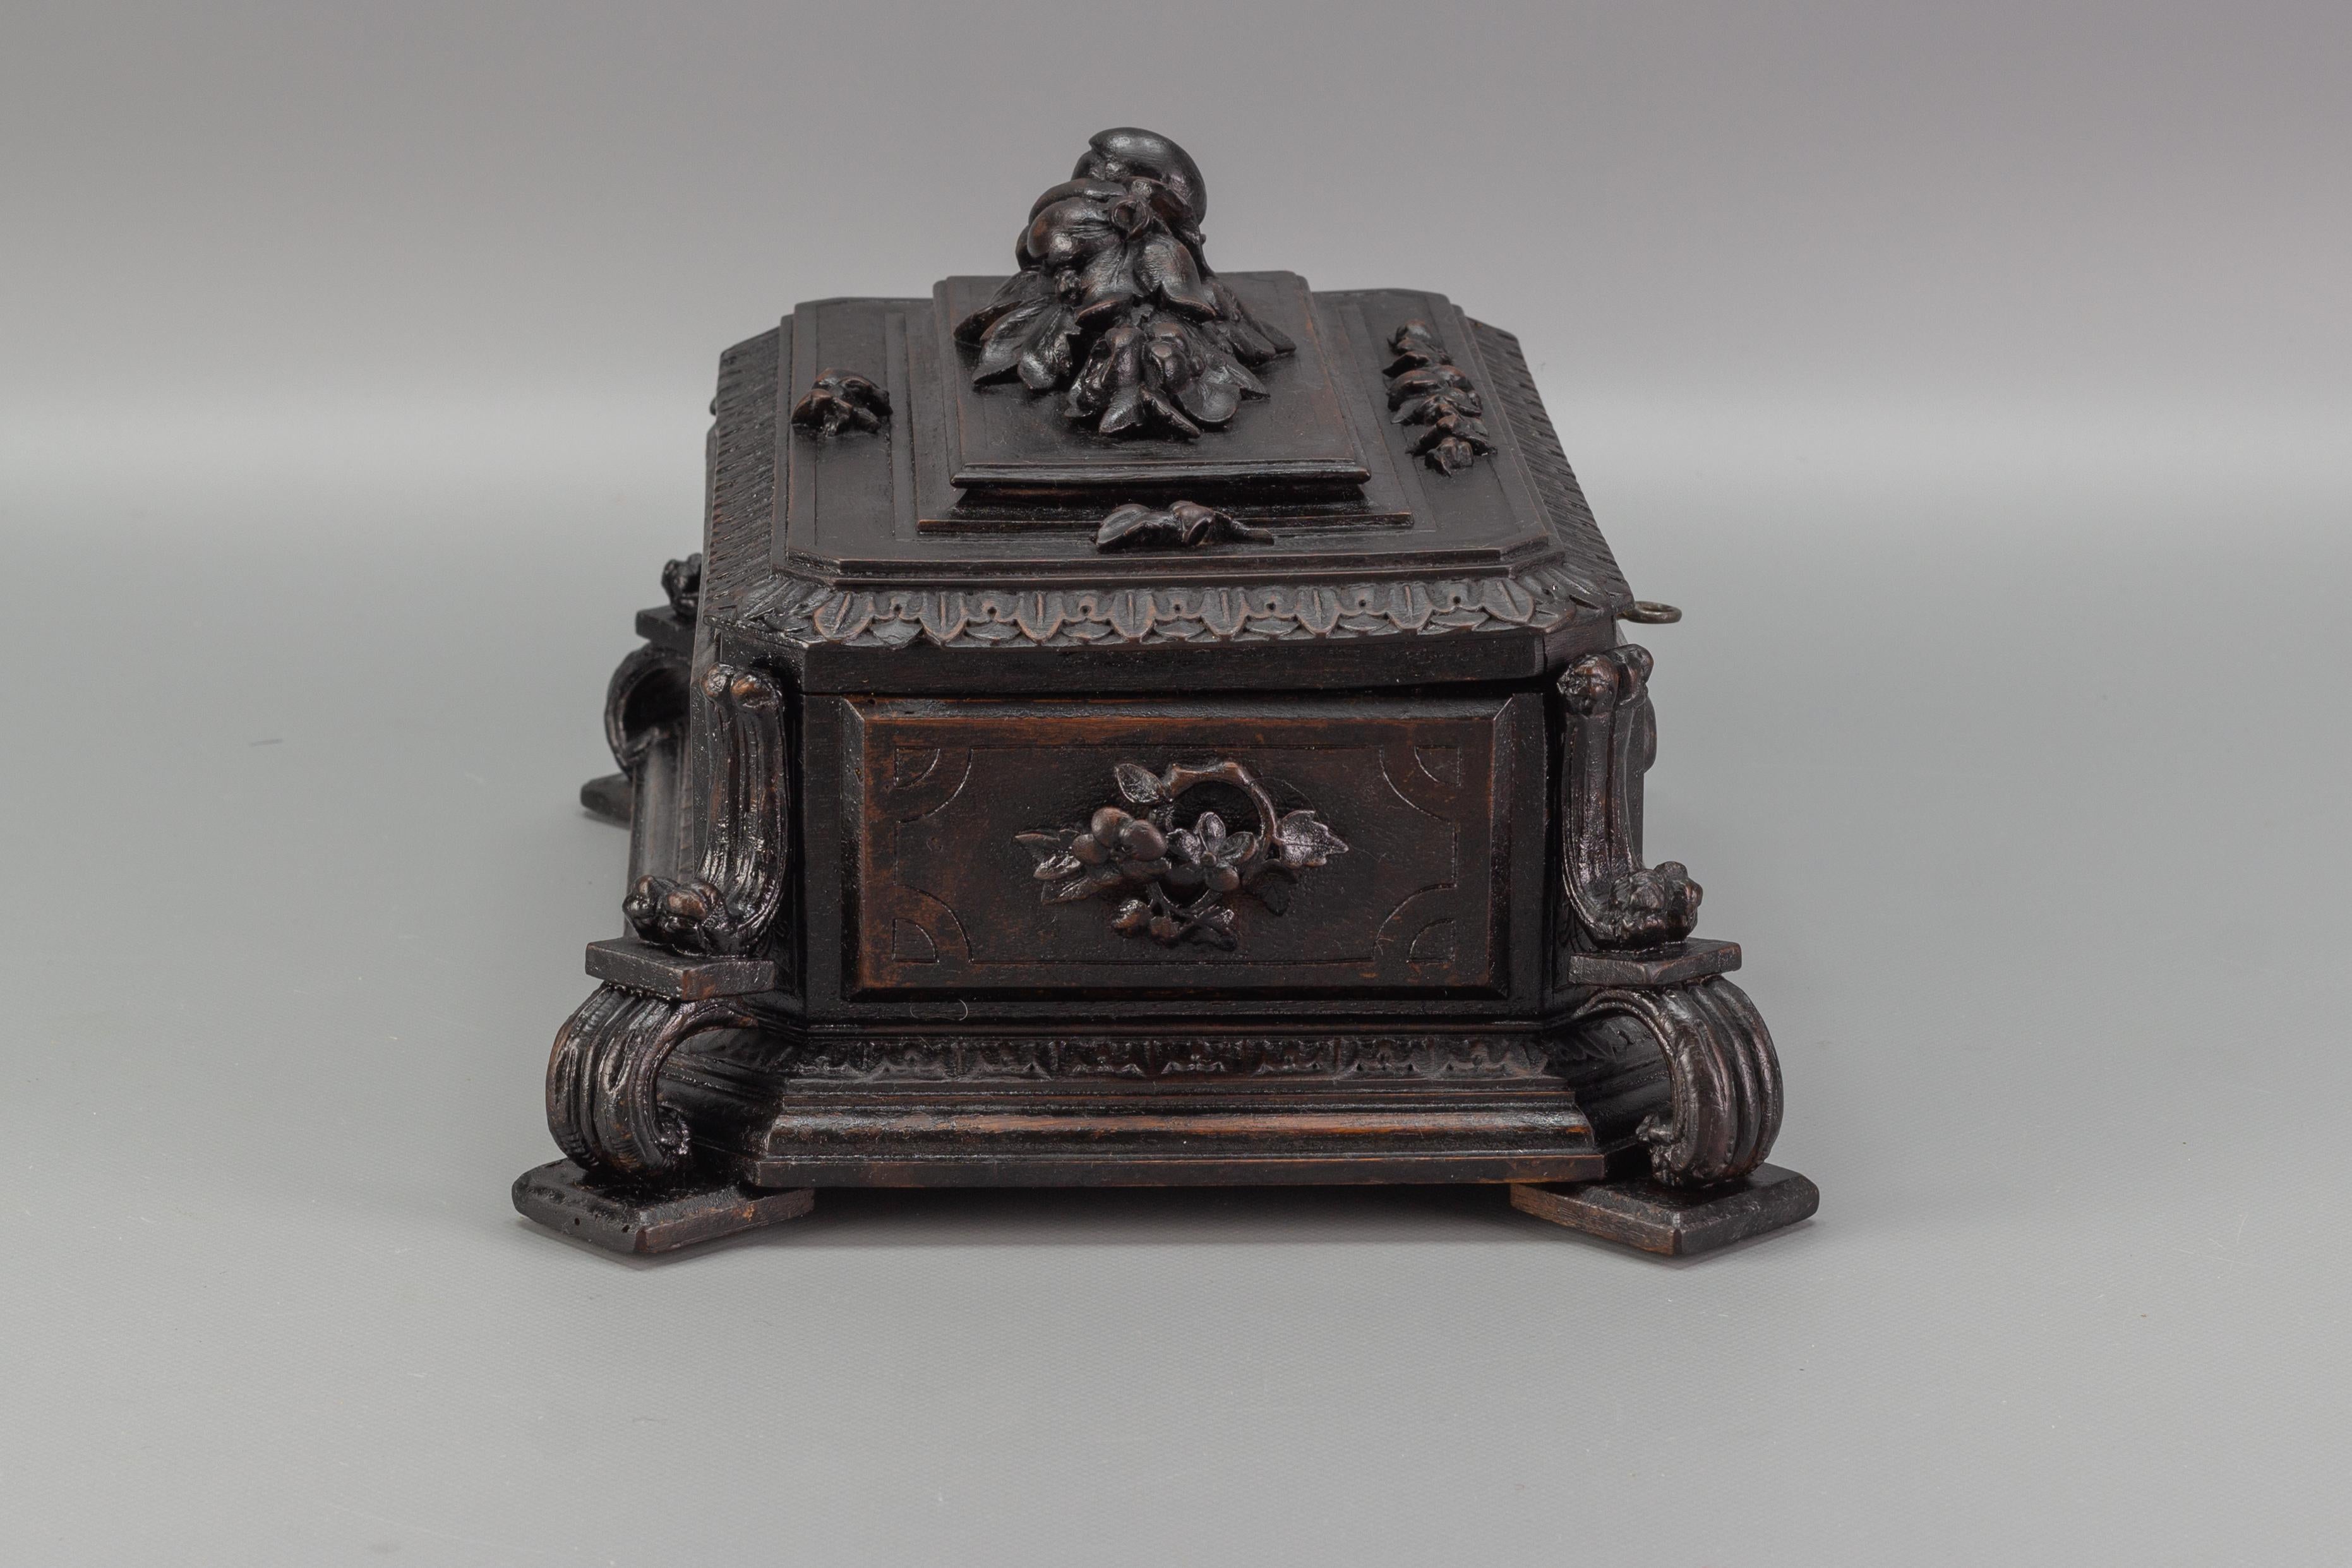 Hand-Carved Antique German Hand Carved Wooden Jewelry Box, Early 20th Century